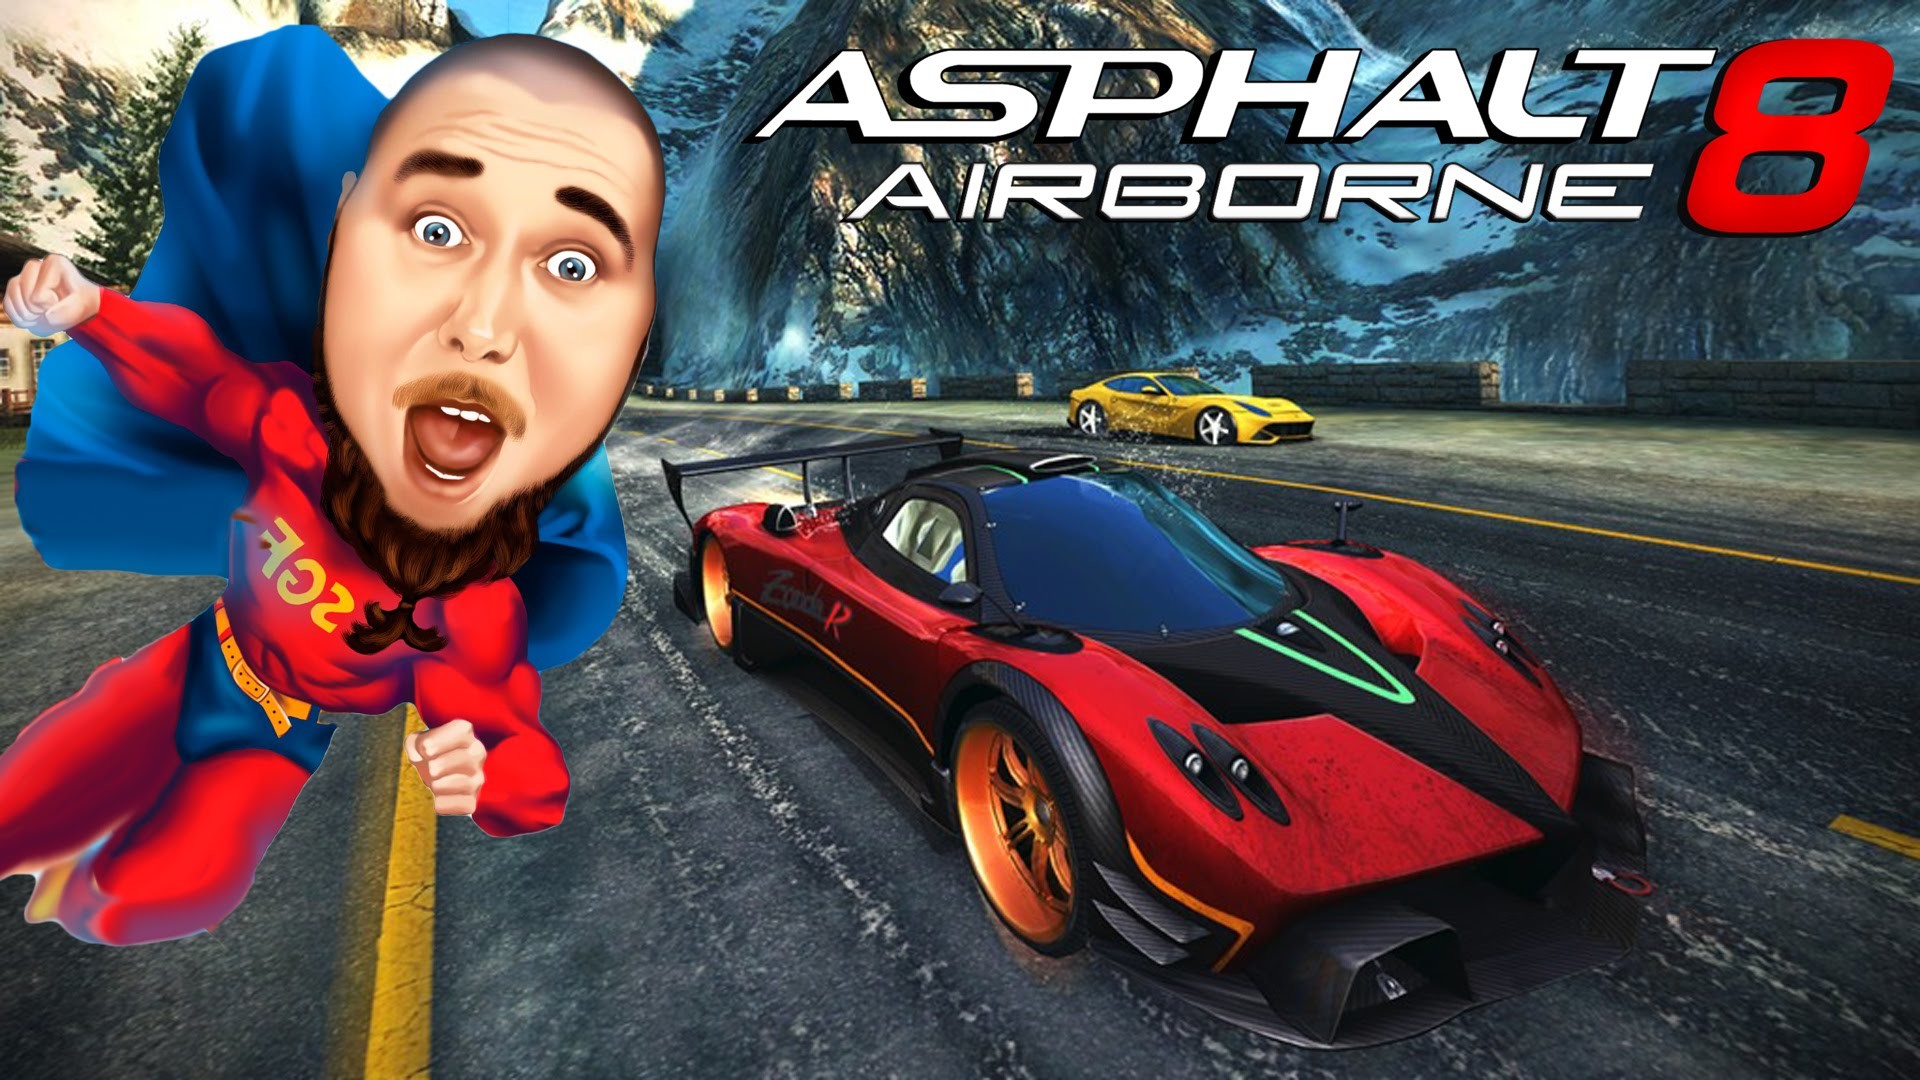 1920x1080 Asphalt 8 Airborne (iOS/Android) Lets play Gameplay